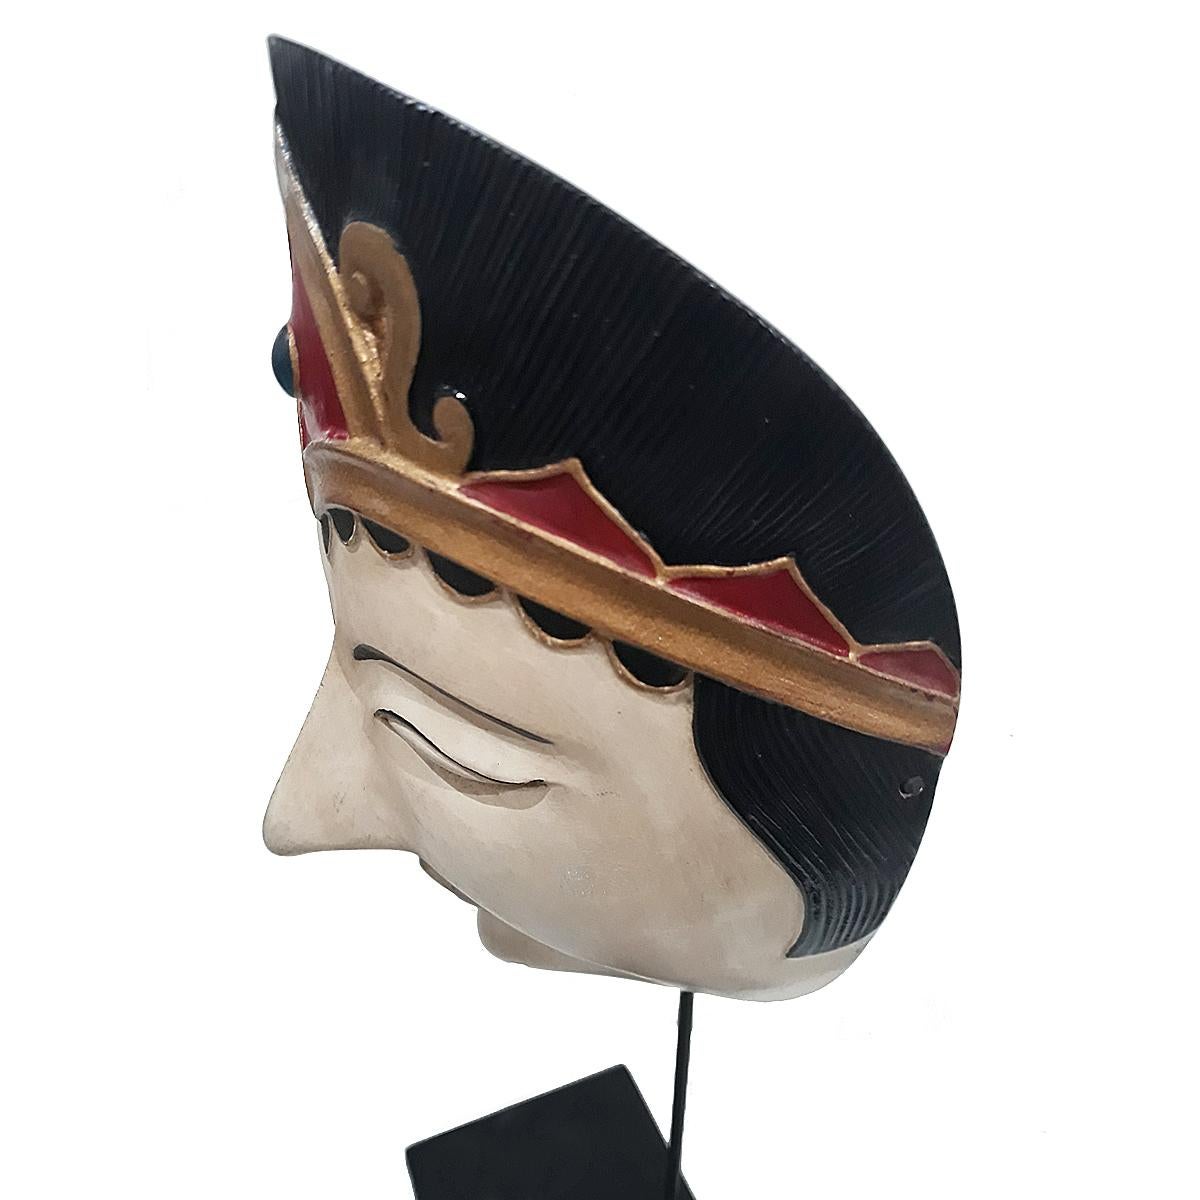 indonesia traditional mask